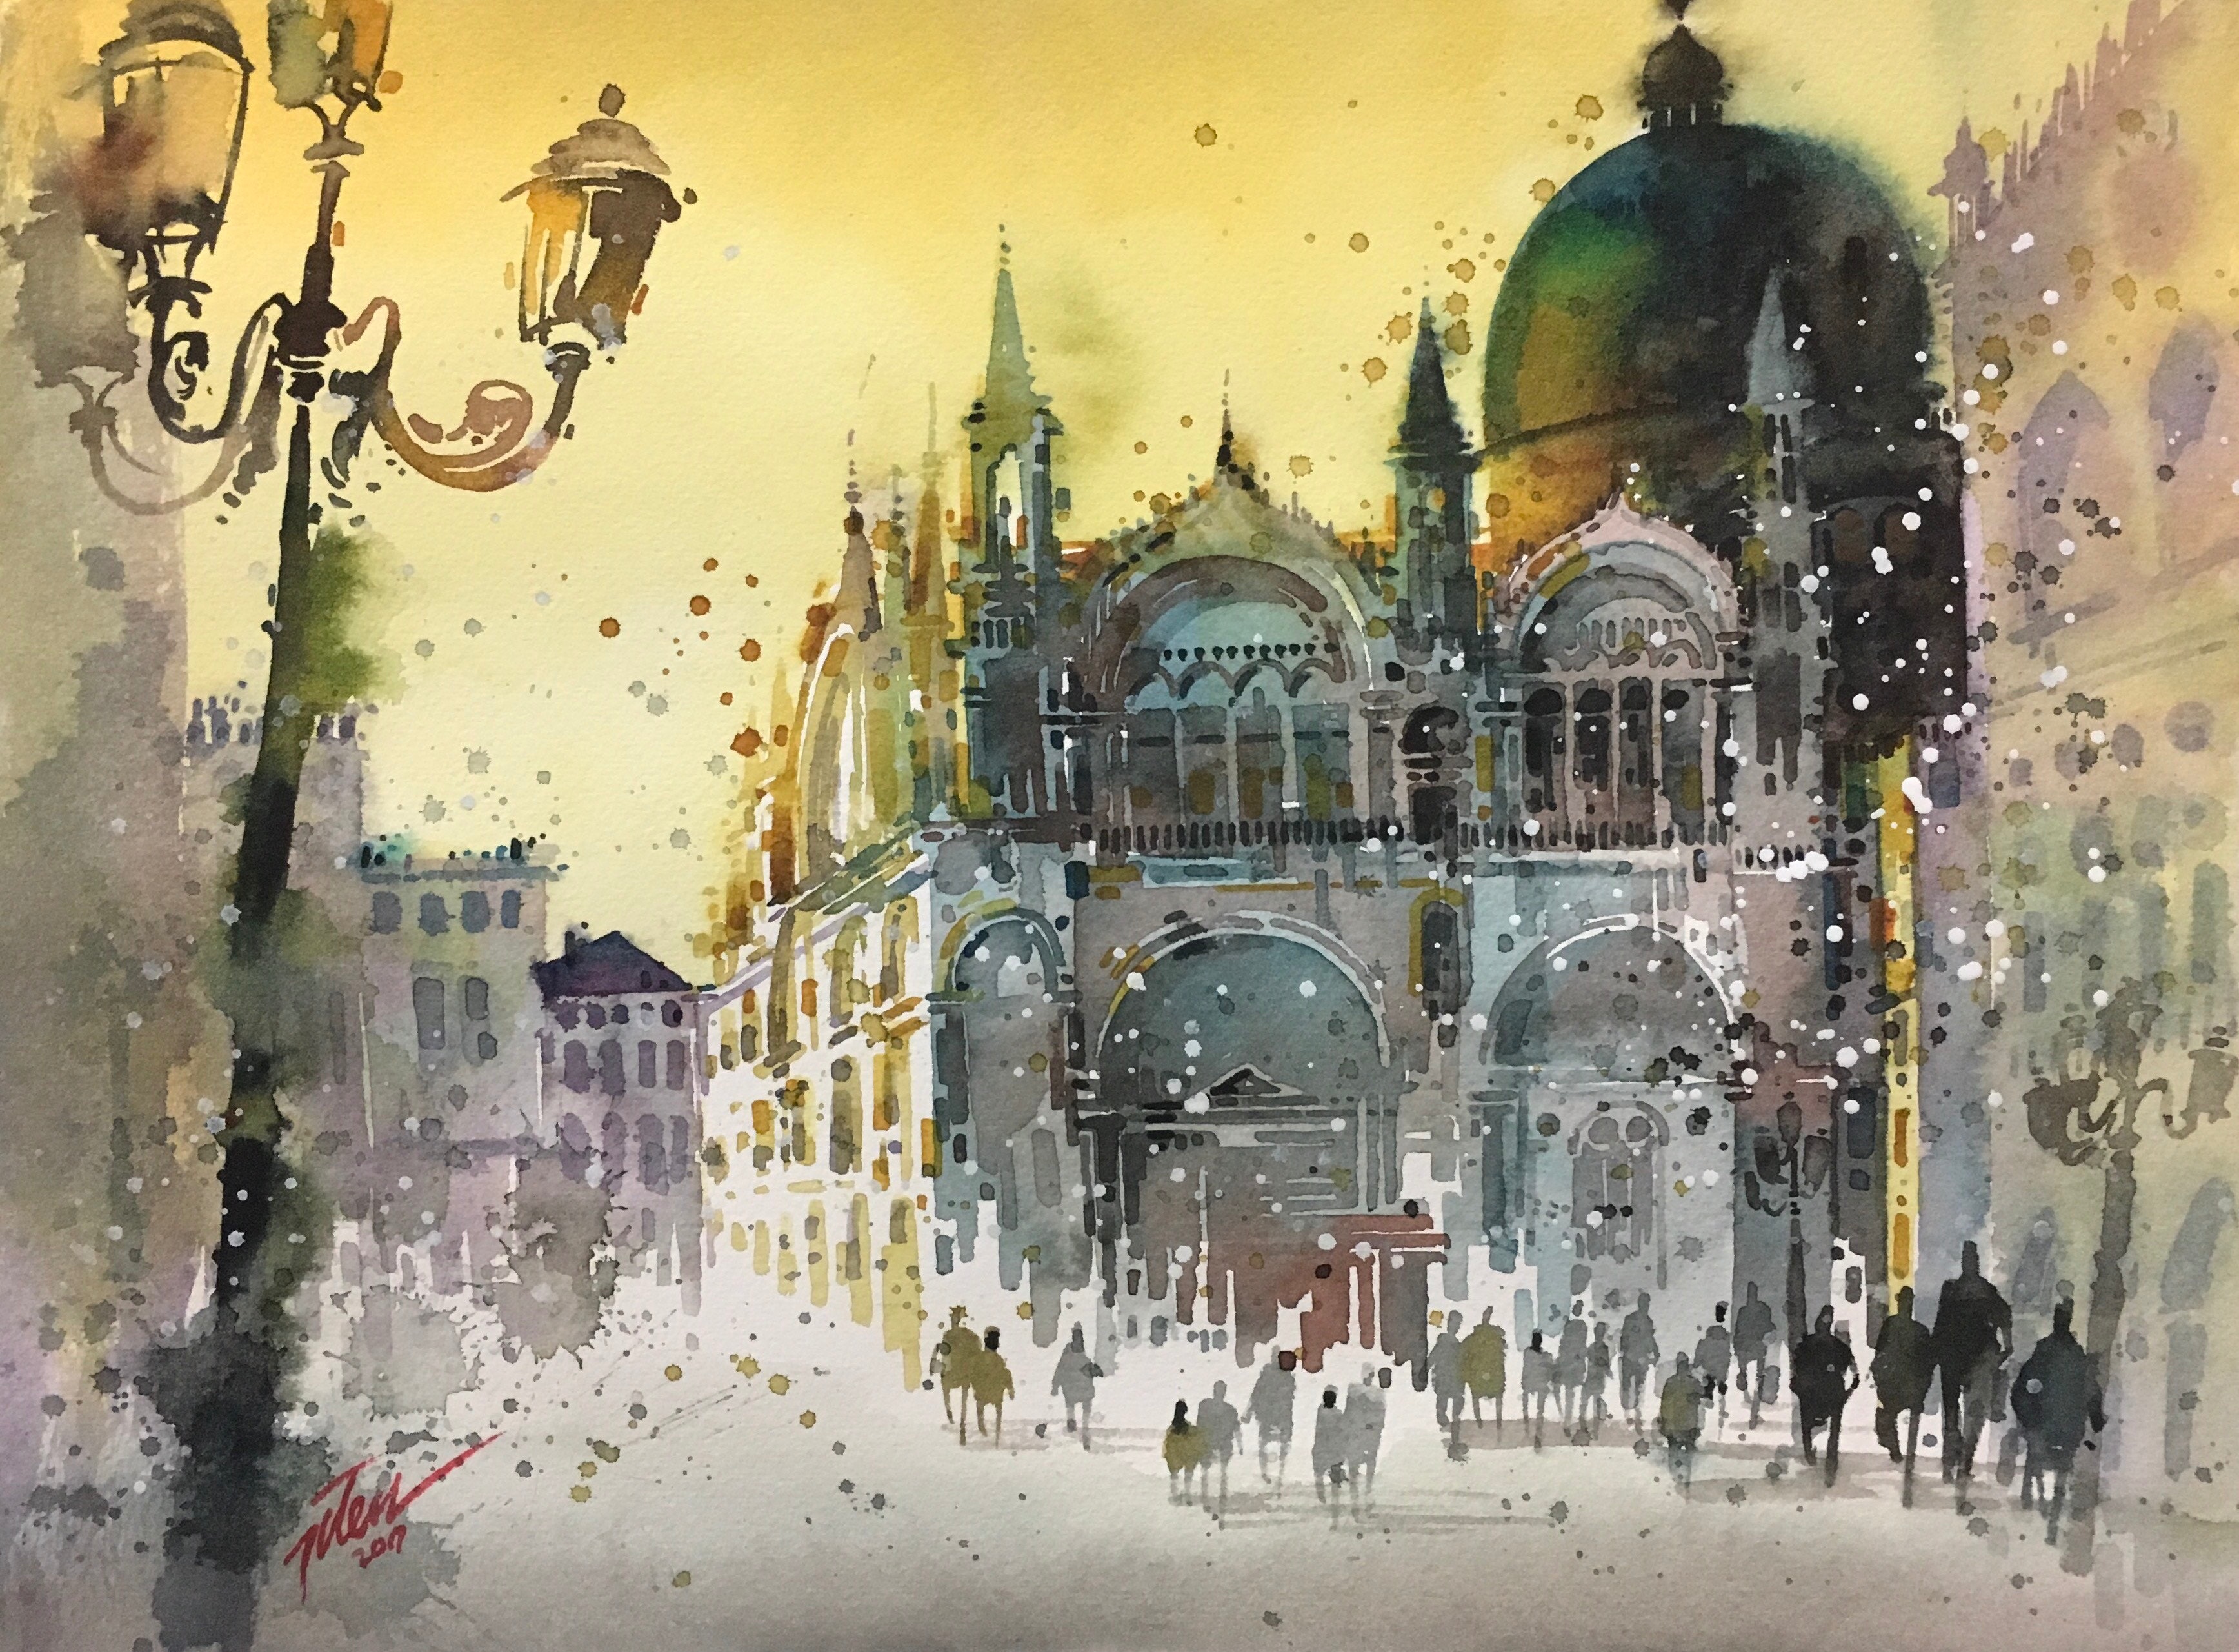 Artwork Architecture Watercolor Cathedral Venice Italy Street Light Building Splashes Painting Crowd 3471x2561